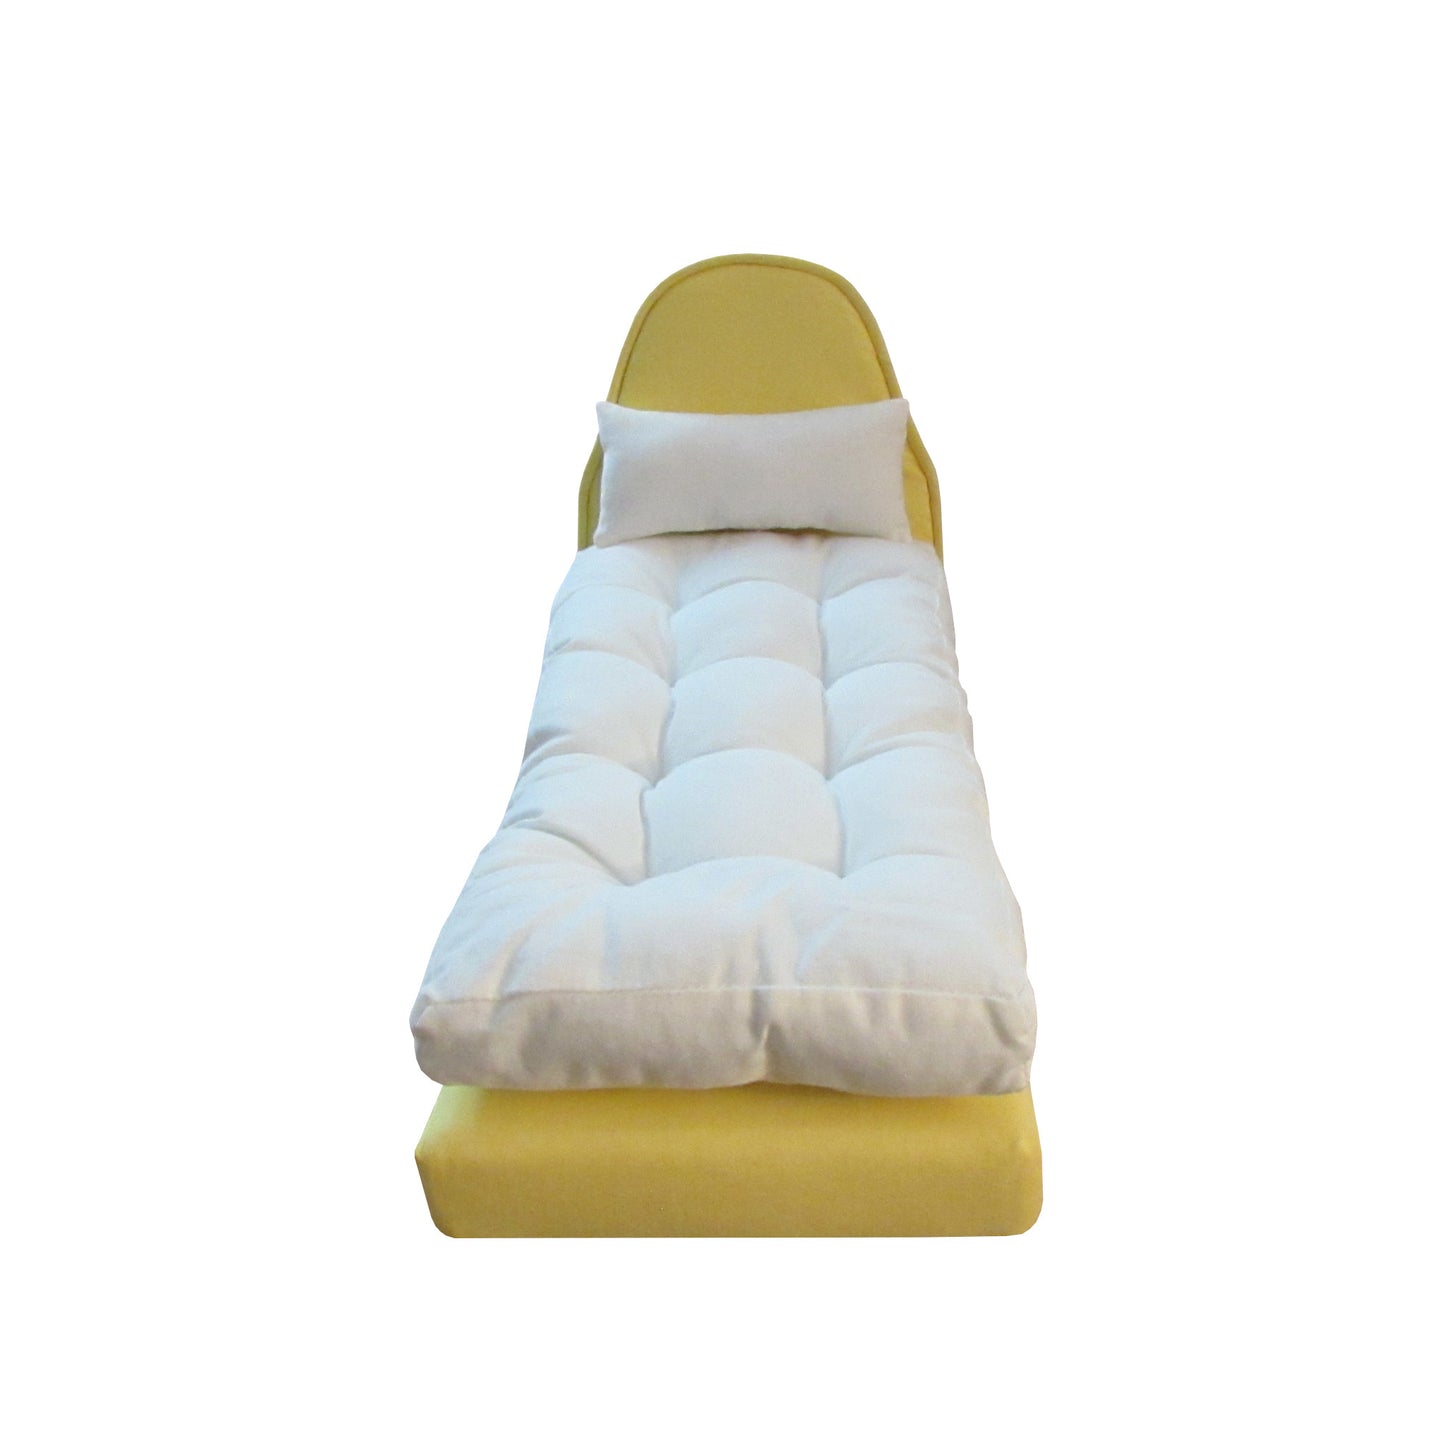 Upholstered Light Yellow Doll Bed and Mattress Front view for 11.5-inch and 12-inch dolls